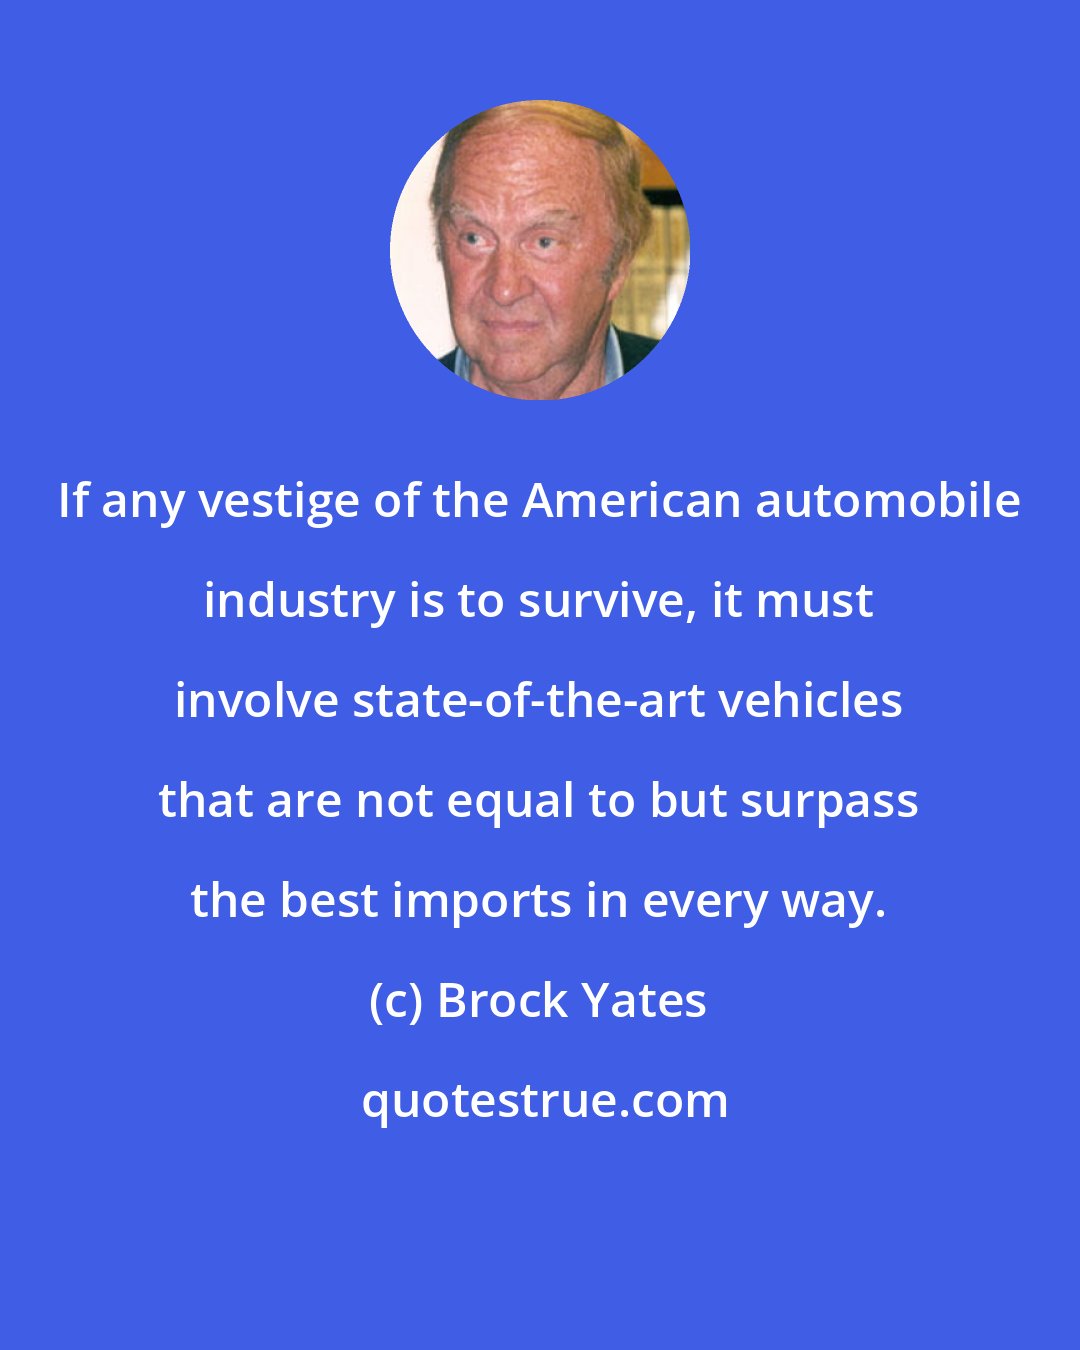 Brock Yates: If any vestige of the American automobile industry is to survive, it must involve state-of-the-art vehicles that are not equal to but surpass the best imports in every way.